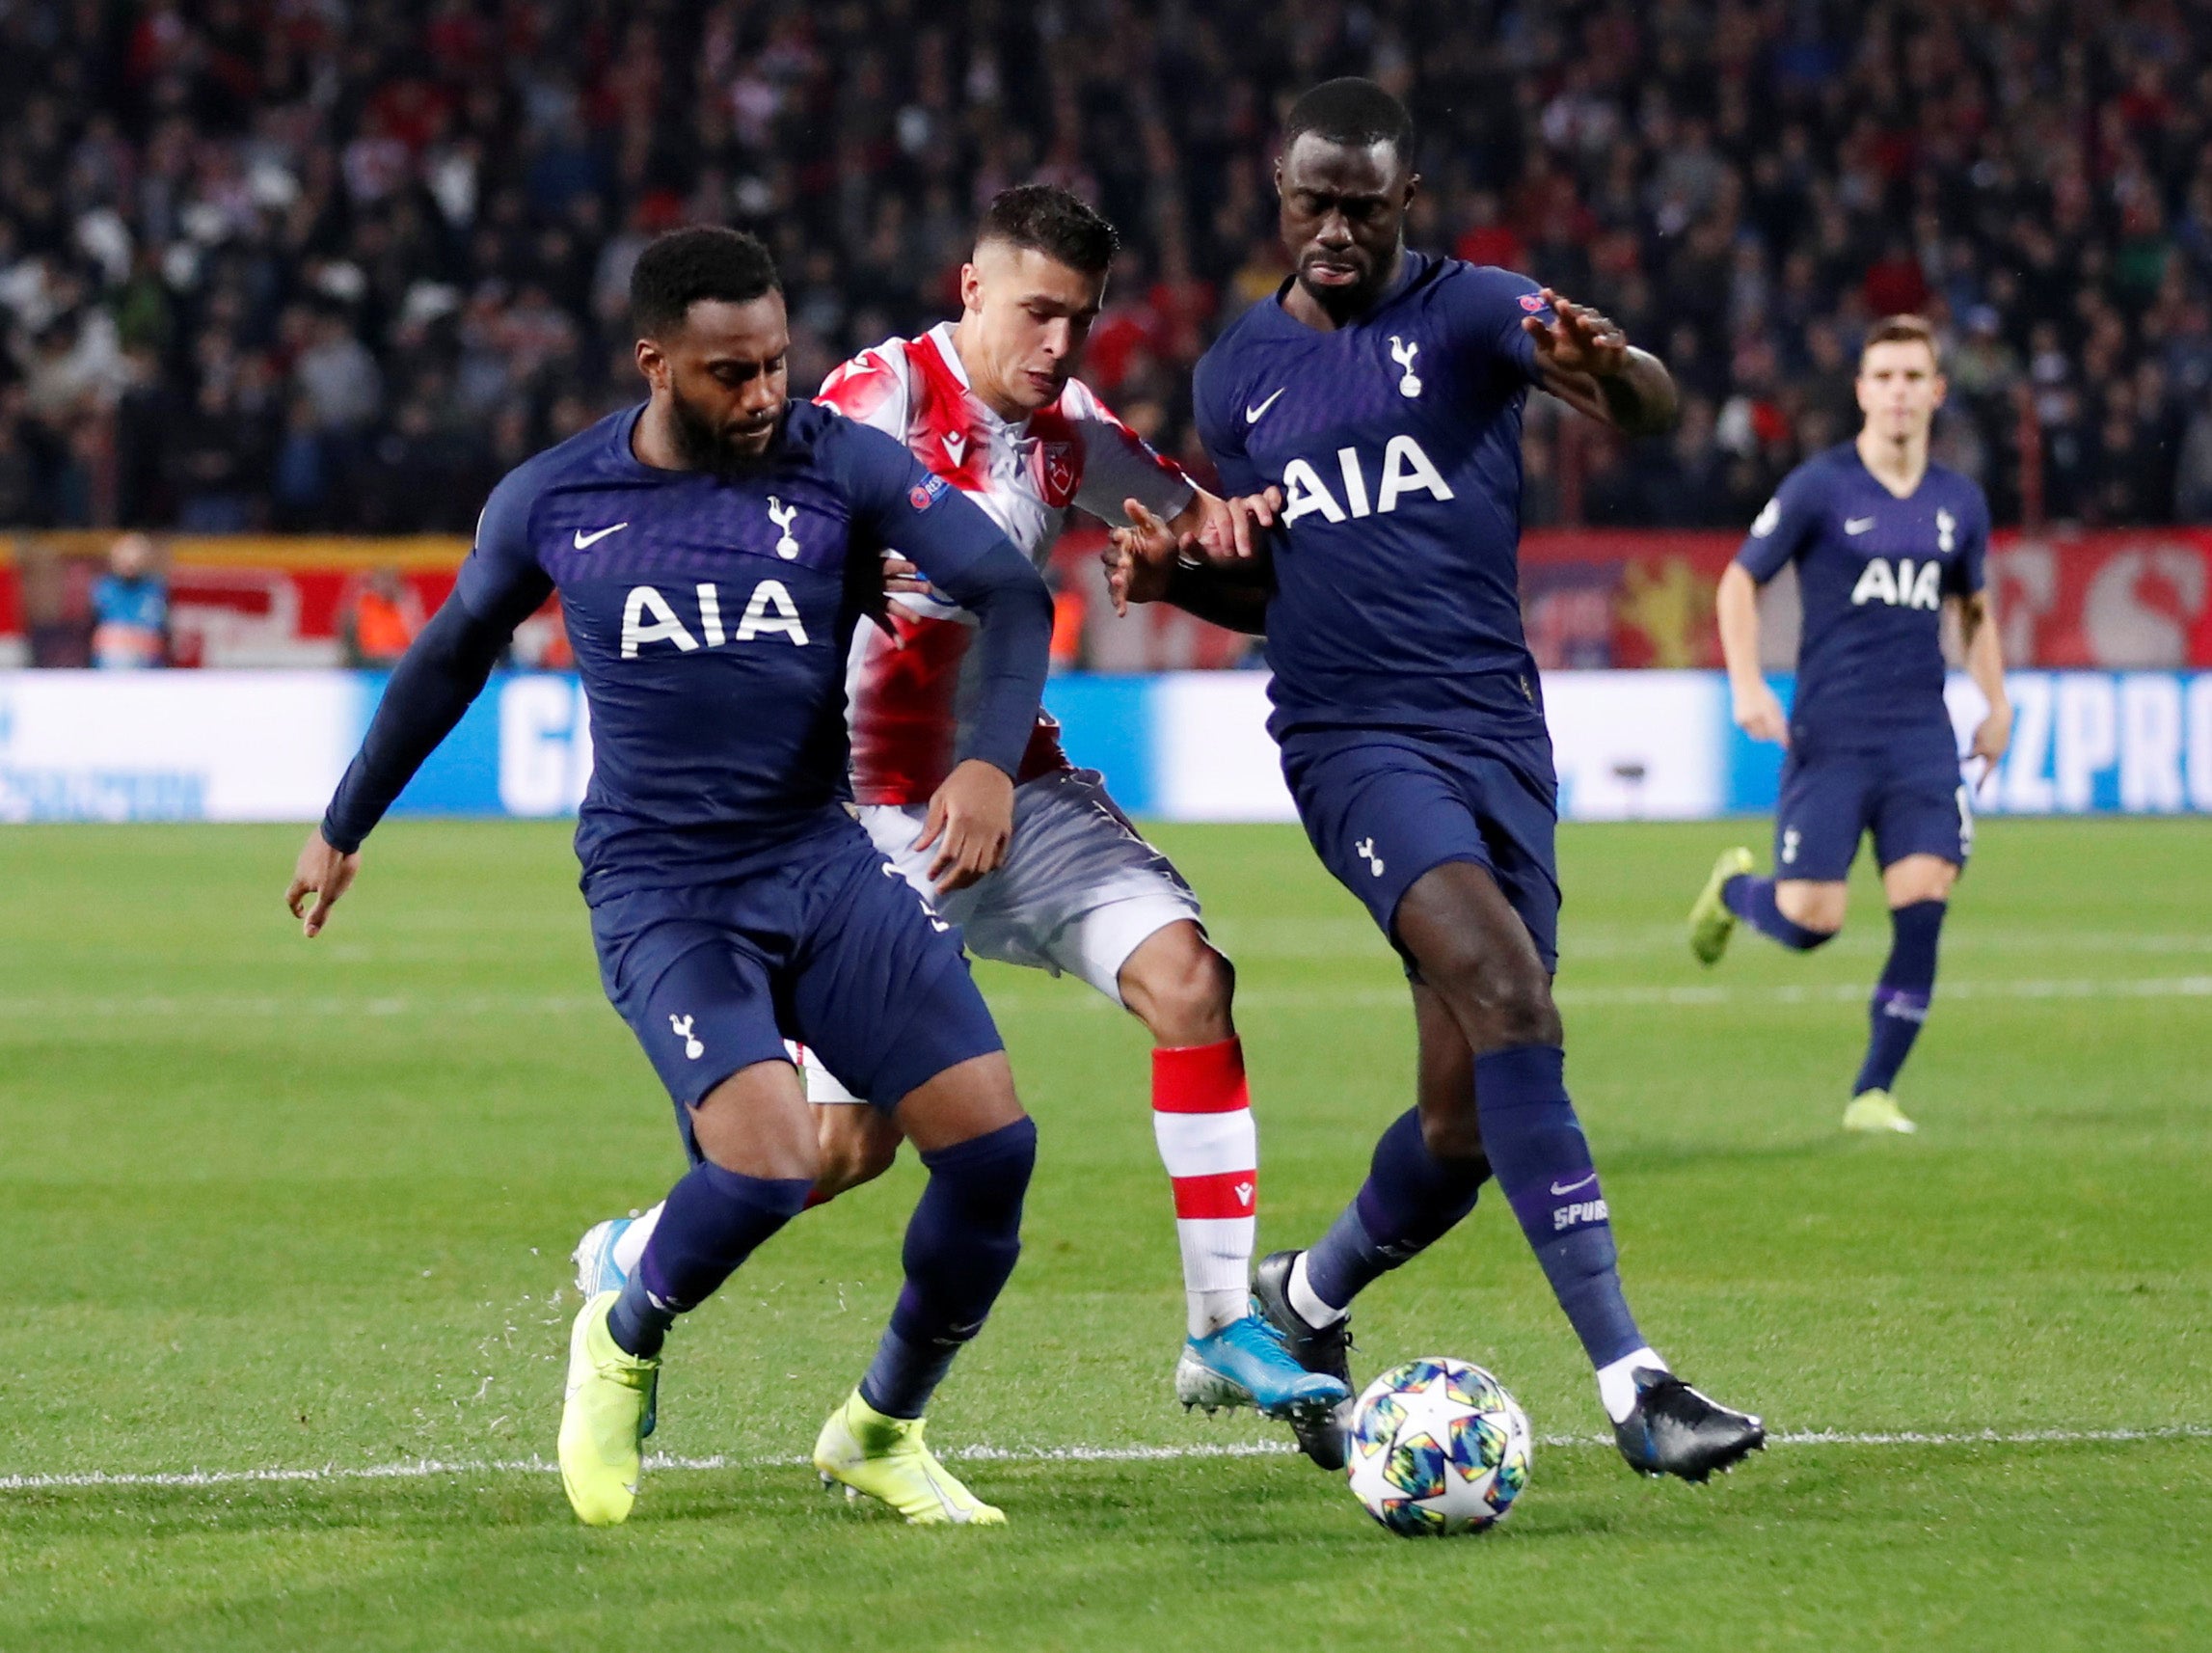 Red Star Belgrade vs Tottenham LIVE: Stream, latest team news and build-up for Champions League clash